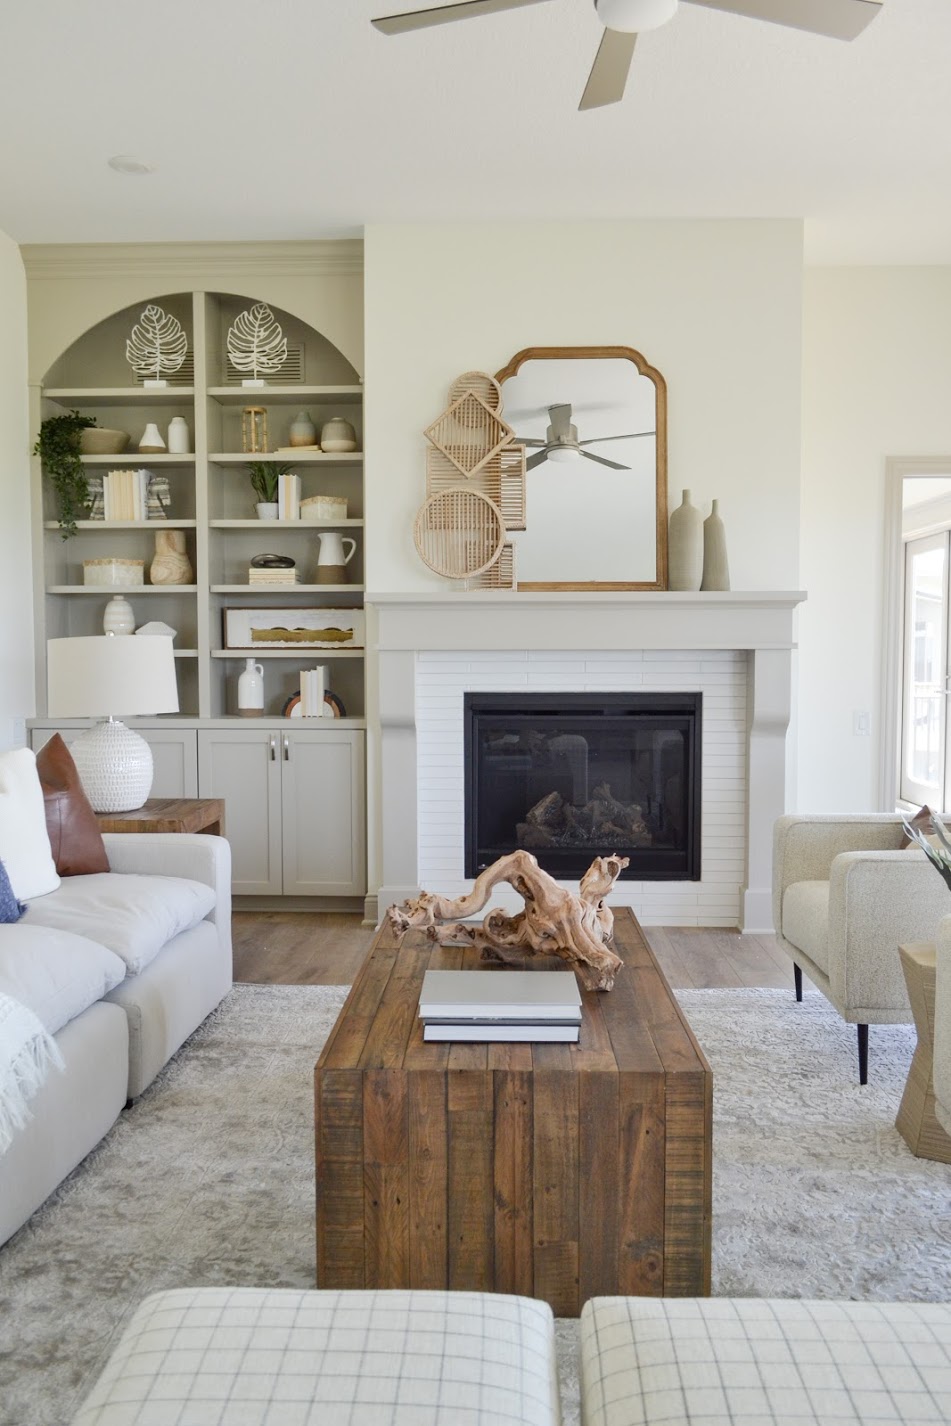 Modern Organic European Farmhouse living room with mirror above fireplace. Built-in taupe shelves and cabinets styled with vases, plants,  and books. 